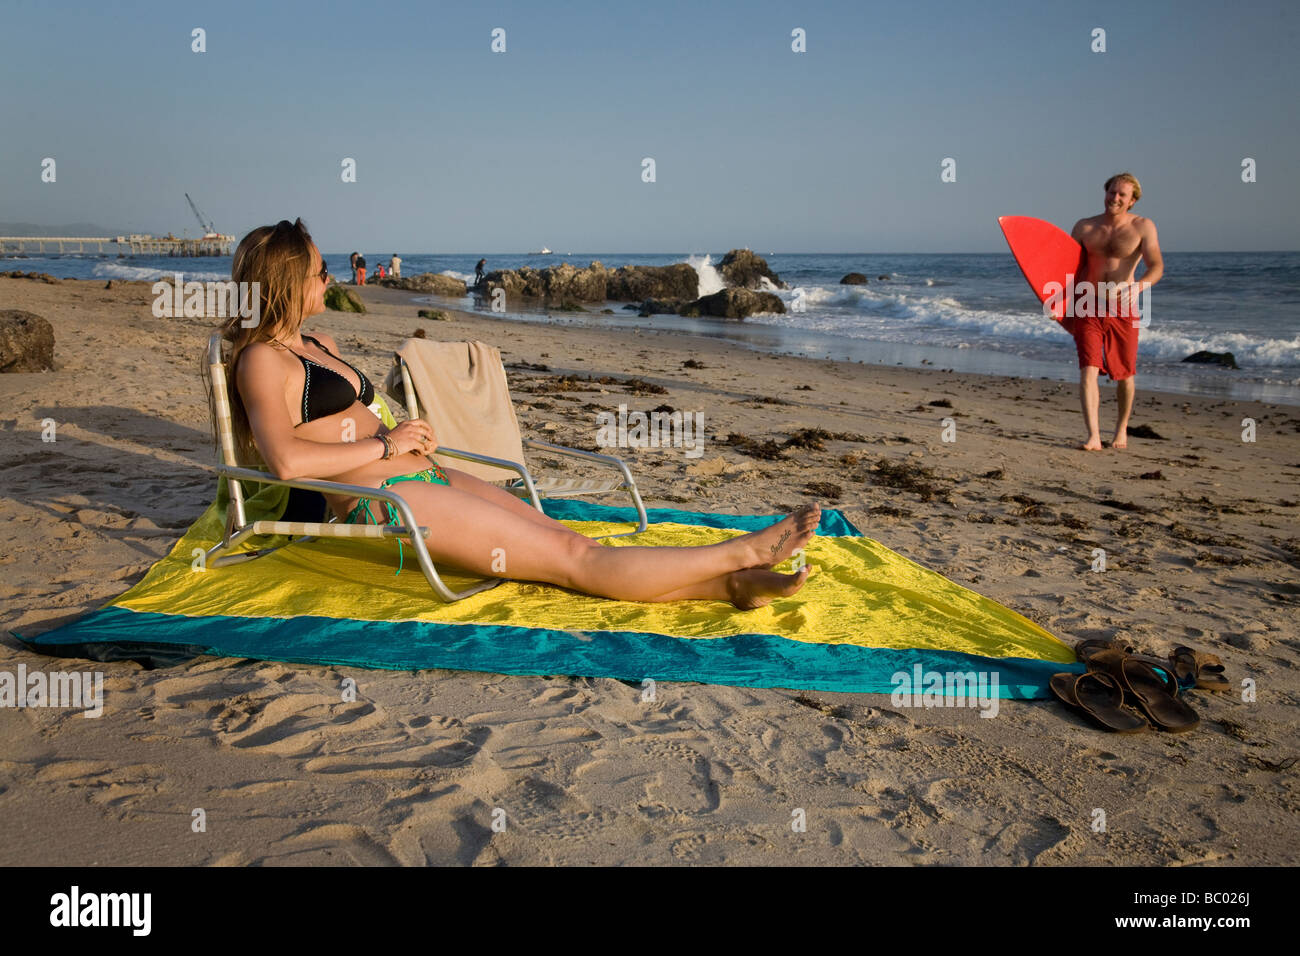 A woman sits in a chair on the beach while a man walks with his surfboard. Stock Photo